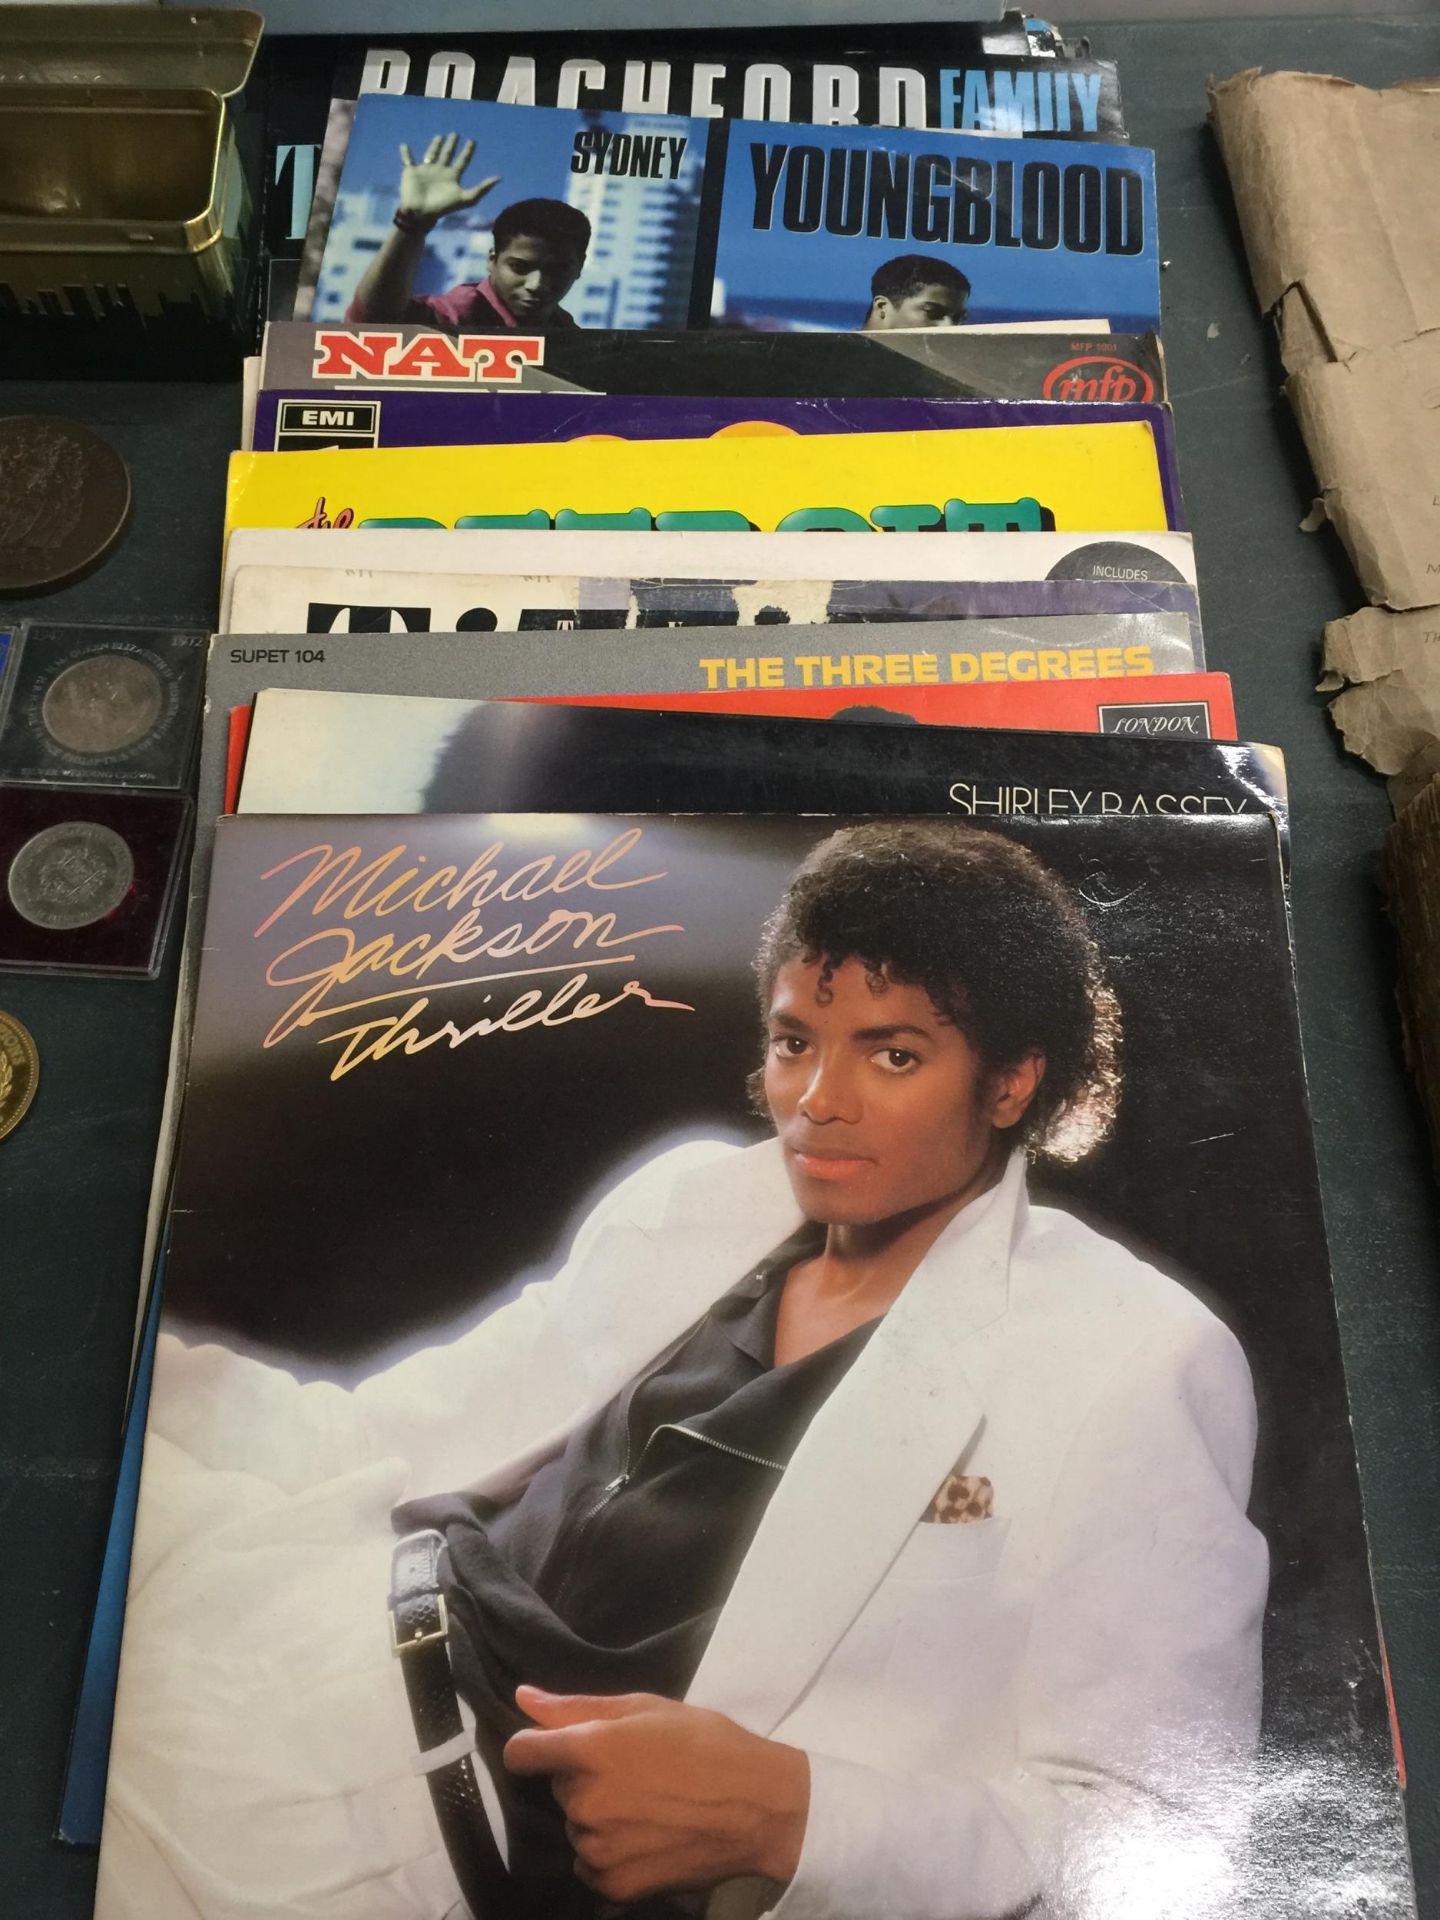 A COLLECTION OF LP RECORDS TO INCLUDE MICHAEL JACKSON - THRILLER, THE THREE DEGREES, TINA TURNER,